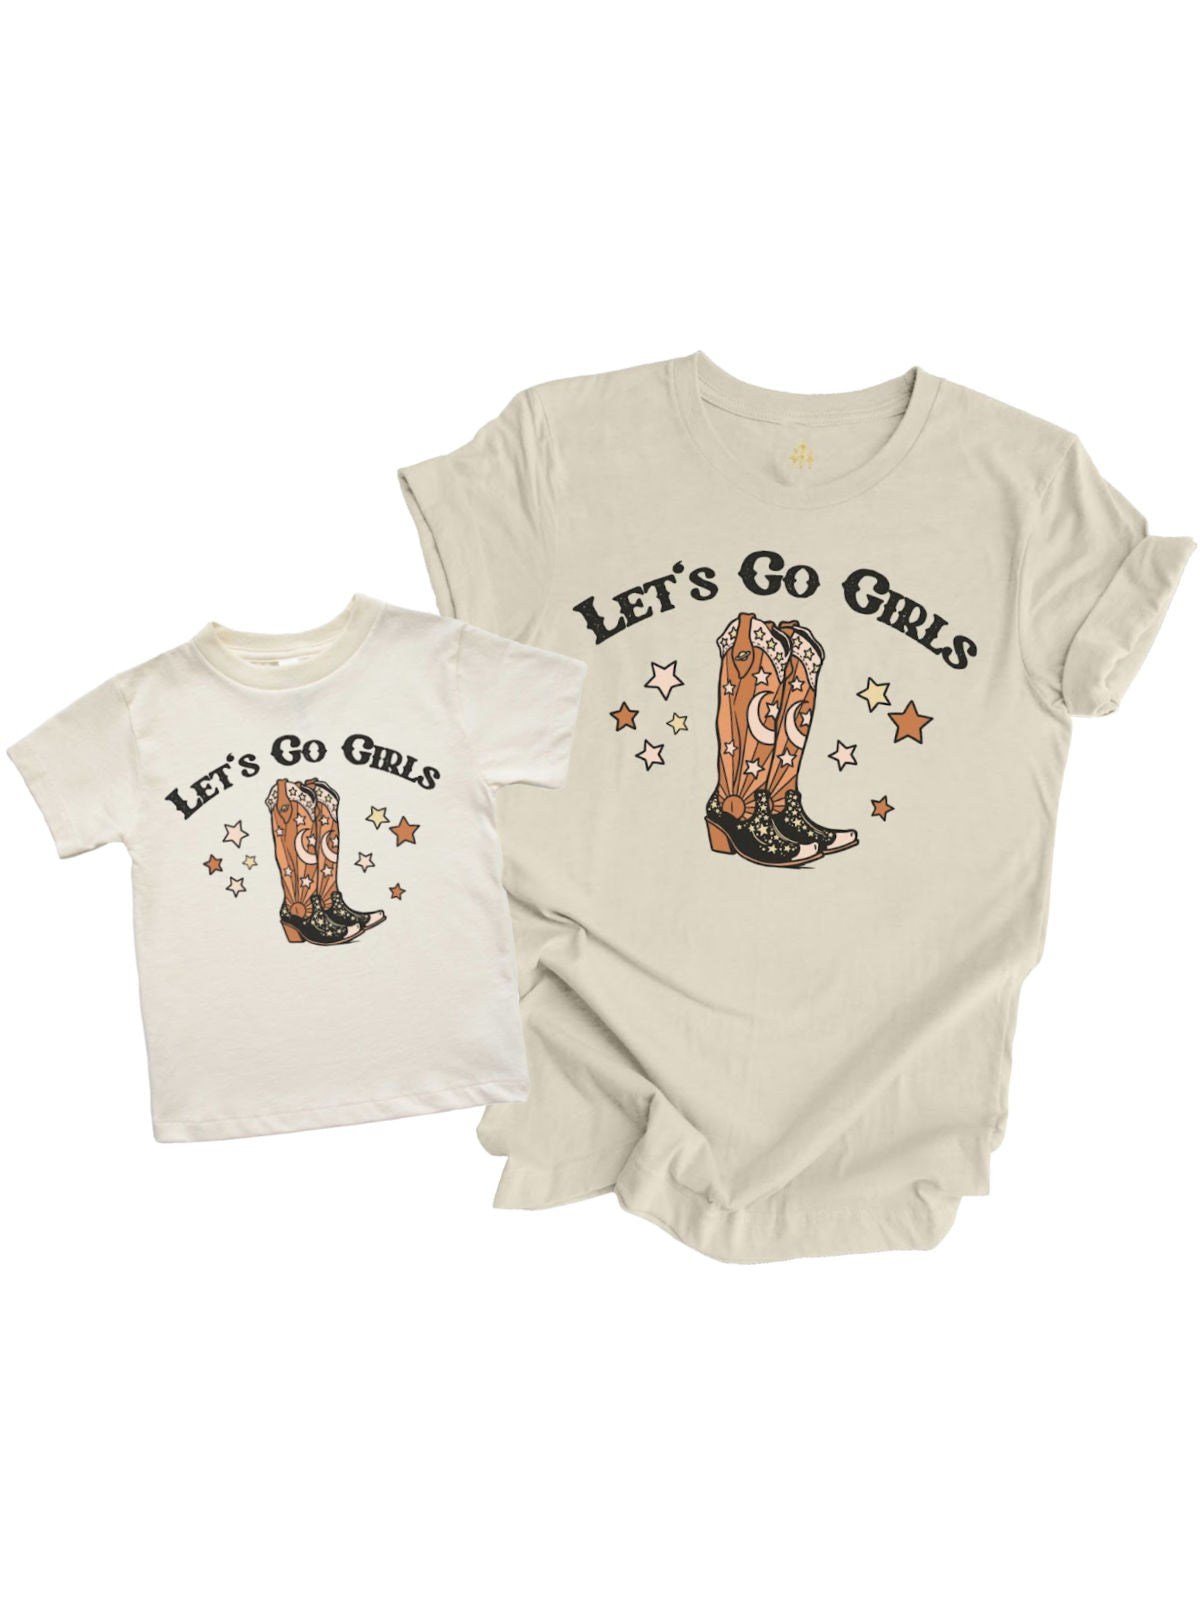 Lets Go Girls Matching Mommy and Me Shirts in Natural